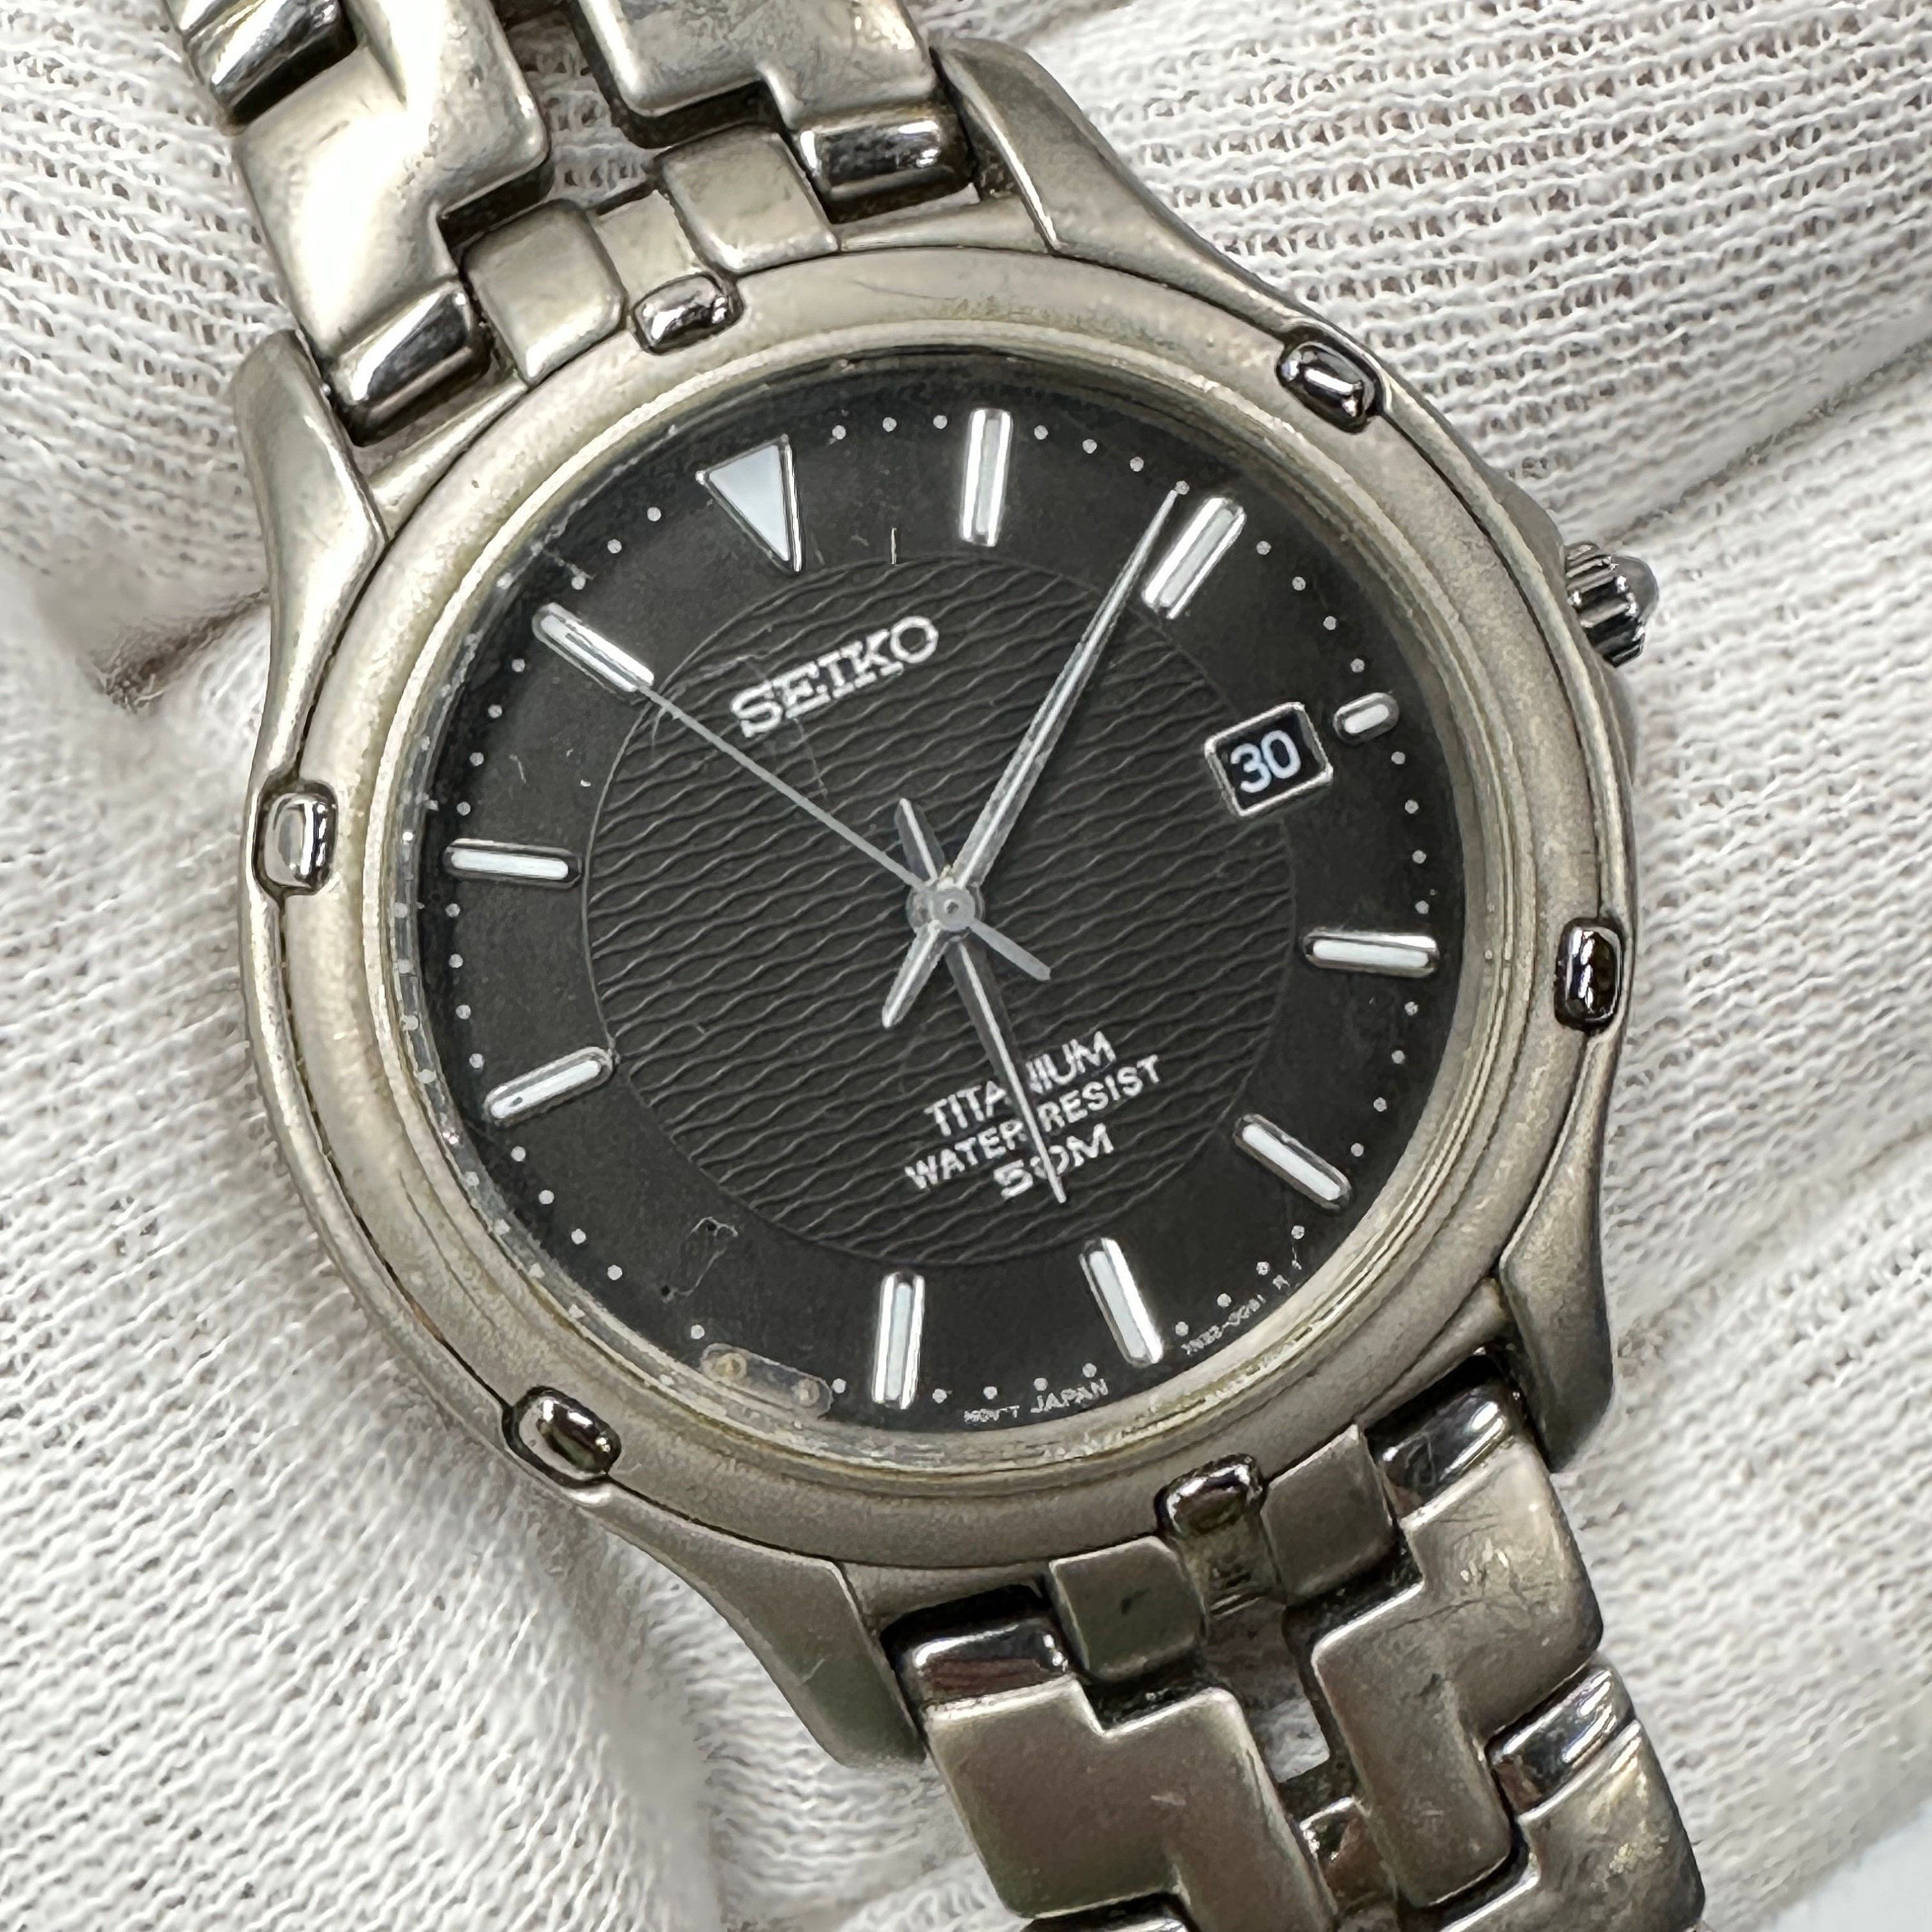 Le Grande Titanium Watch With Date - Etsy